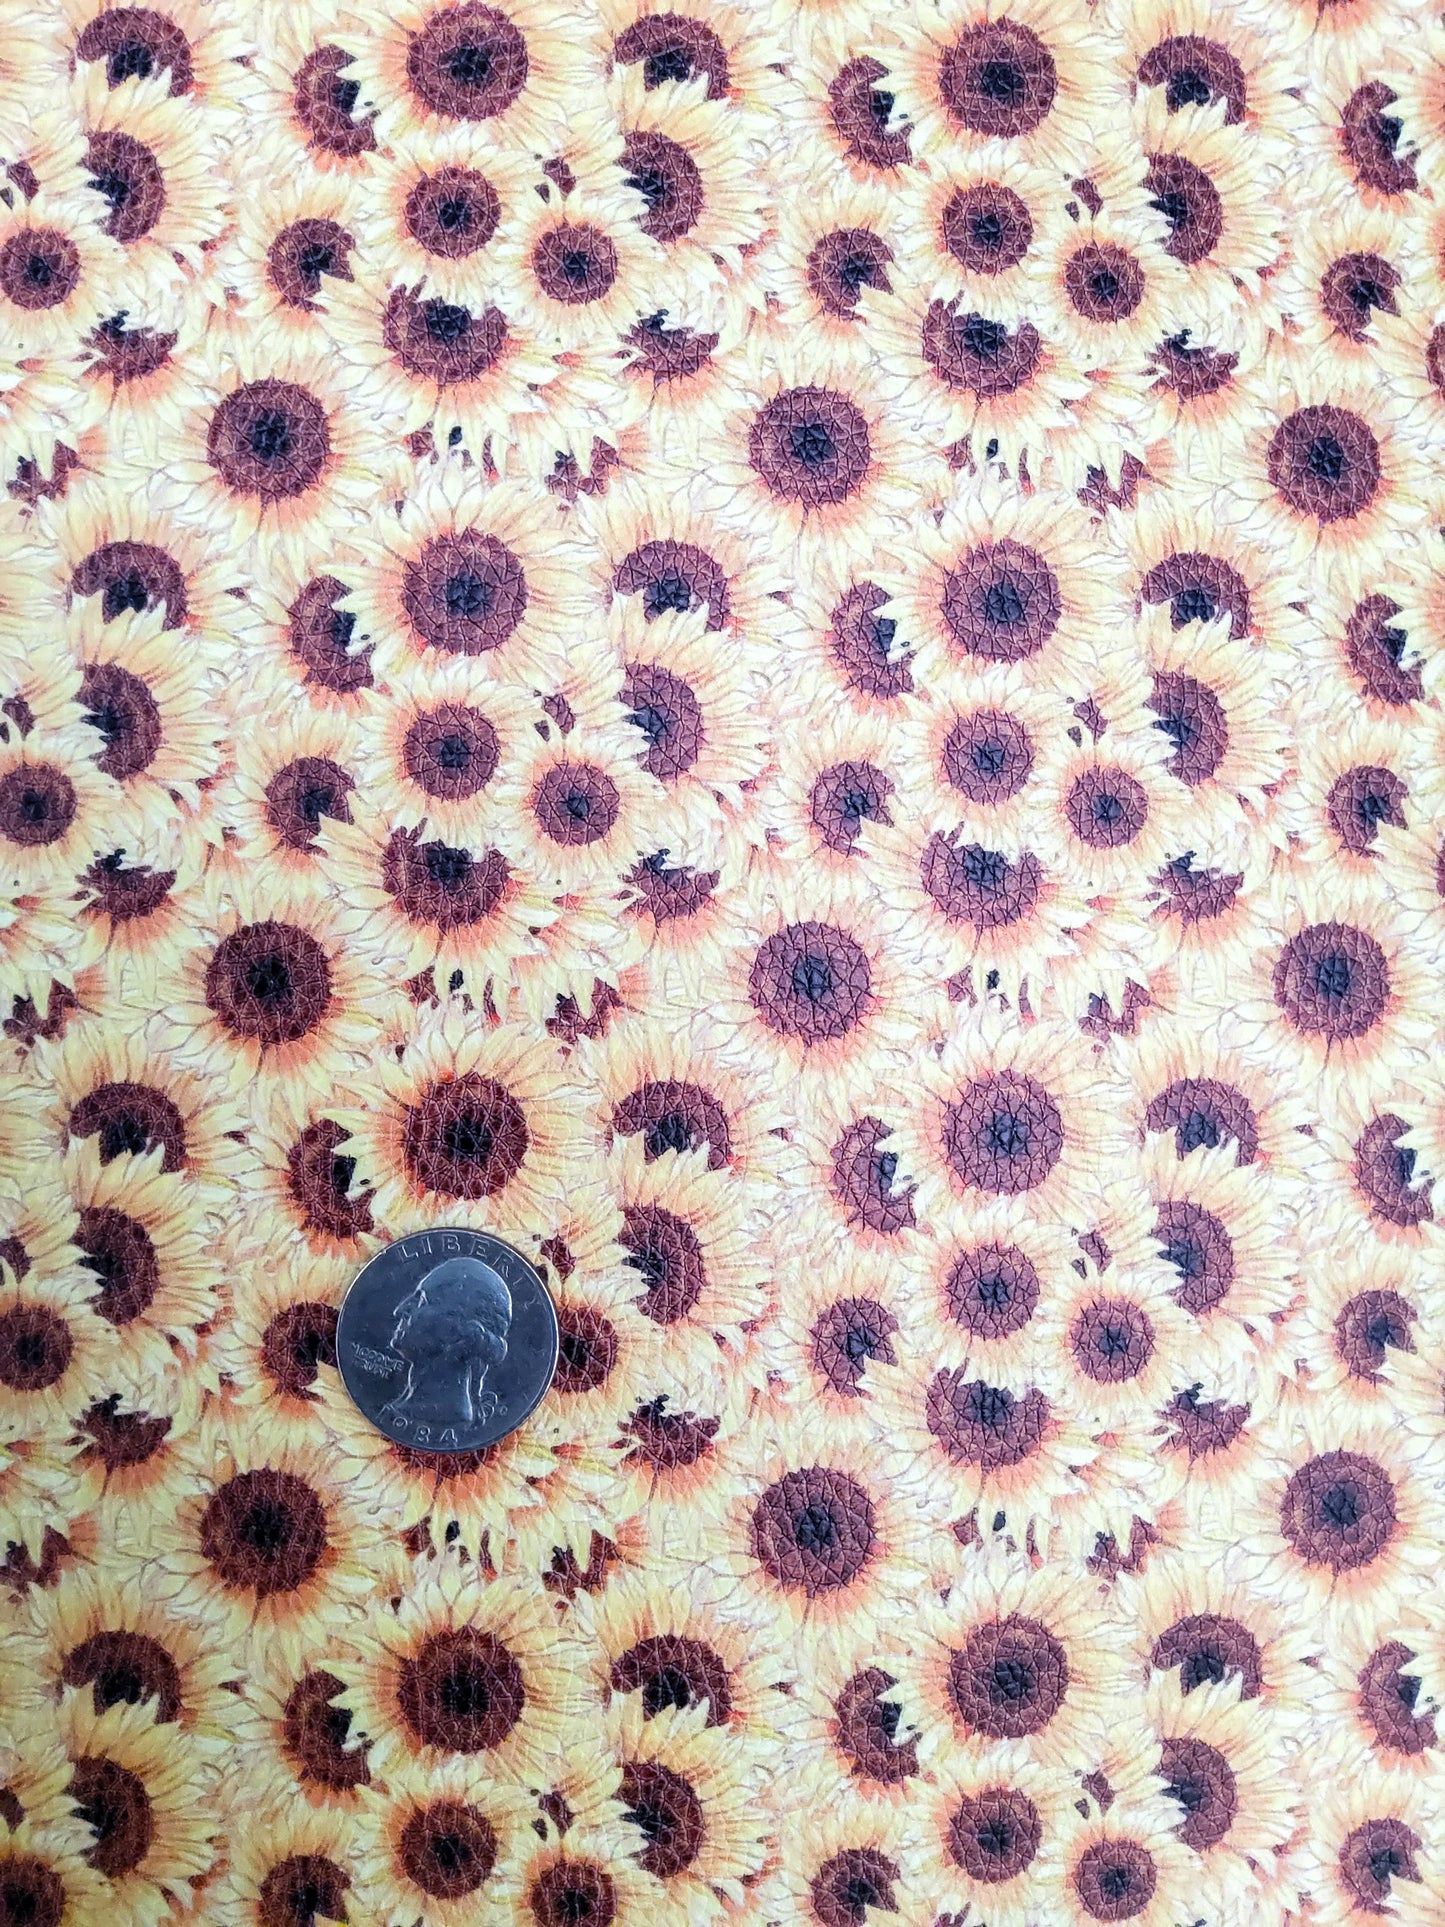 Sunflower Collage 9x12 faux leather sheet